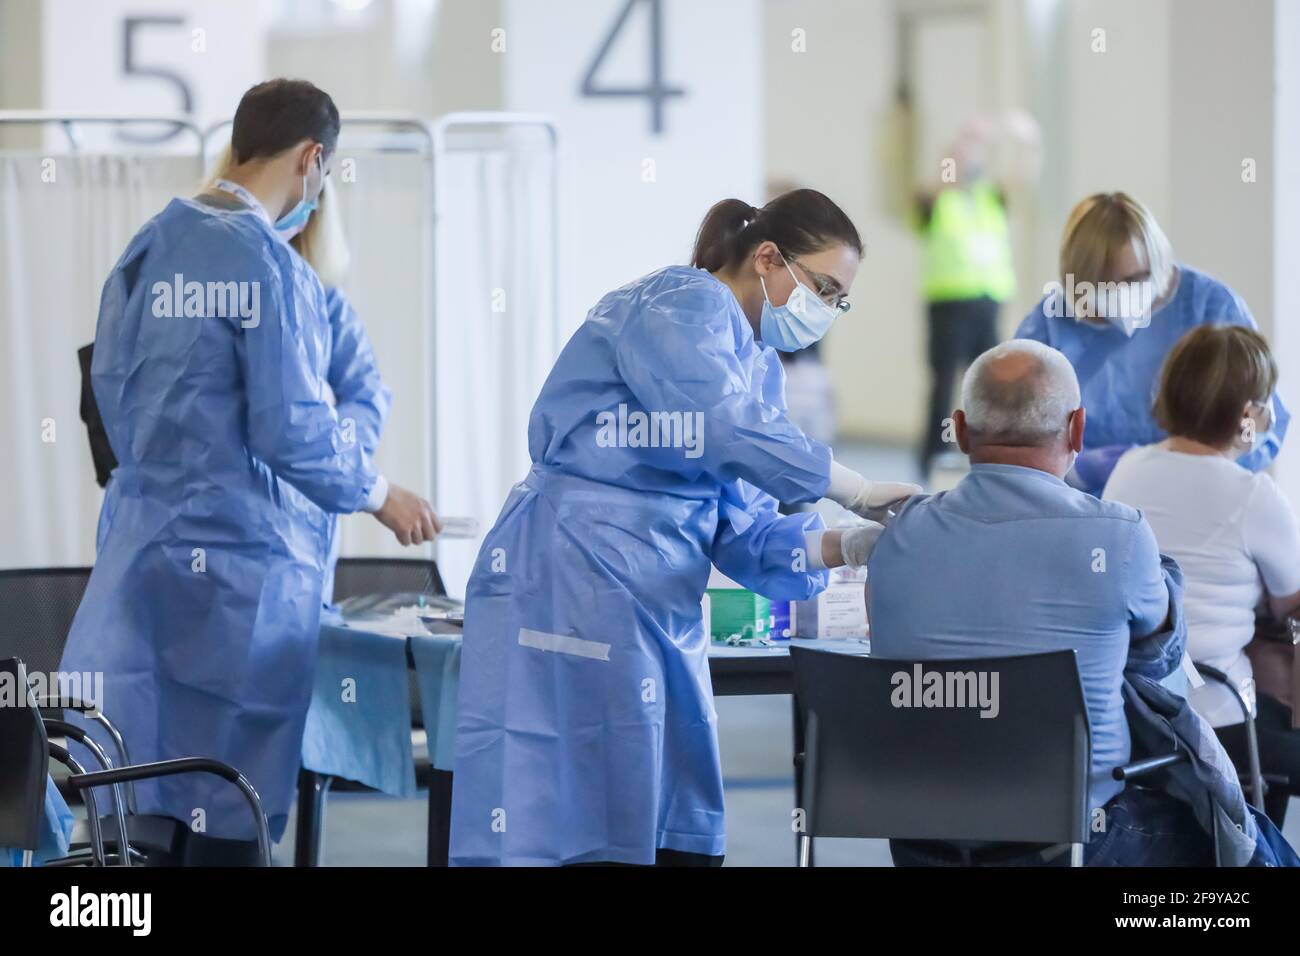 Zagreb, Croatia. 21th April 2021. Organized mass vaccination of citizens with the Pfizer vaccine  against Covid 19 virus in pavilion 6 of the Zagreb Fair. Medical workers vaccinate citizens. Stock Photo